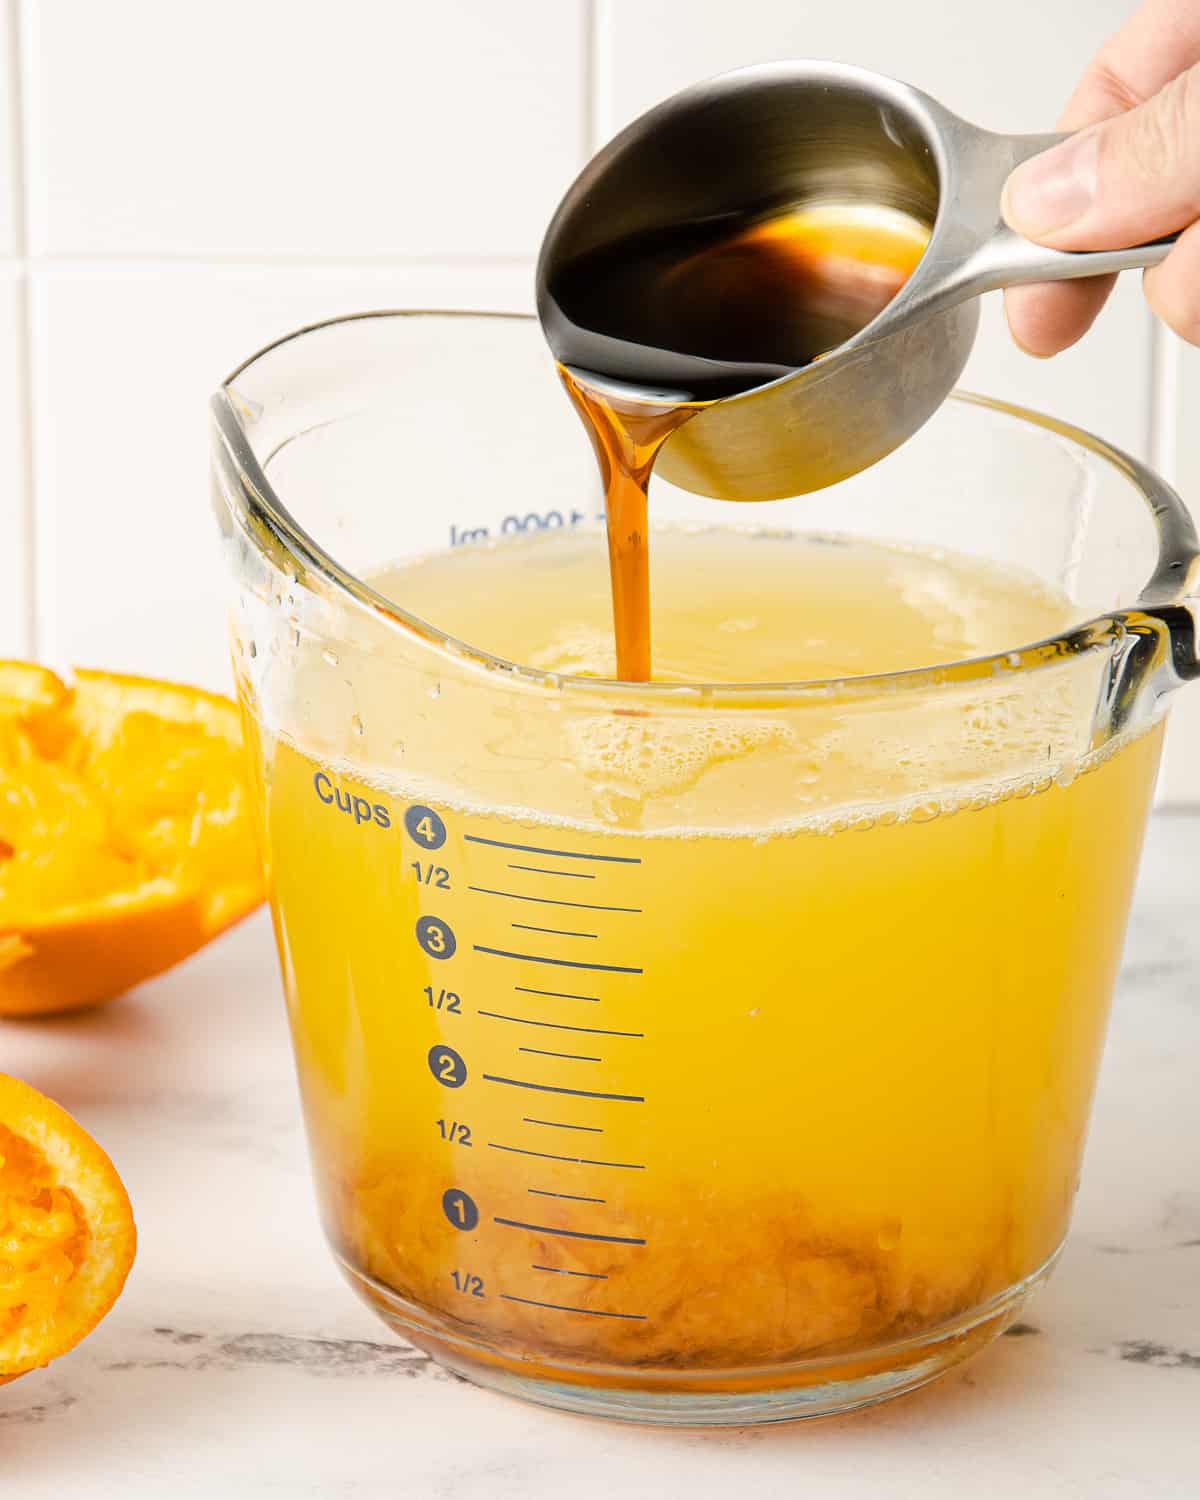 Pouring honey into a measuring cup of orange juice and water.